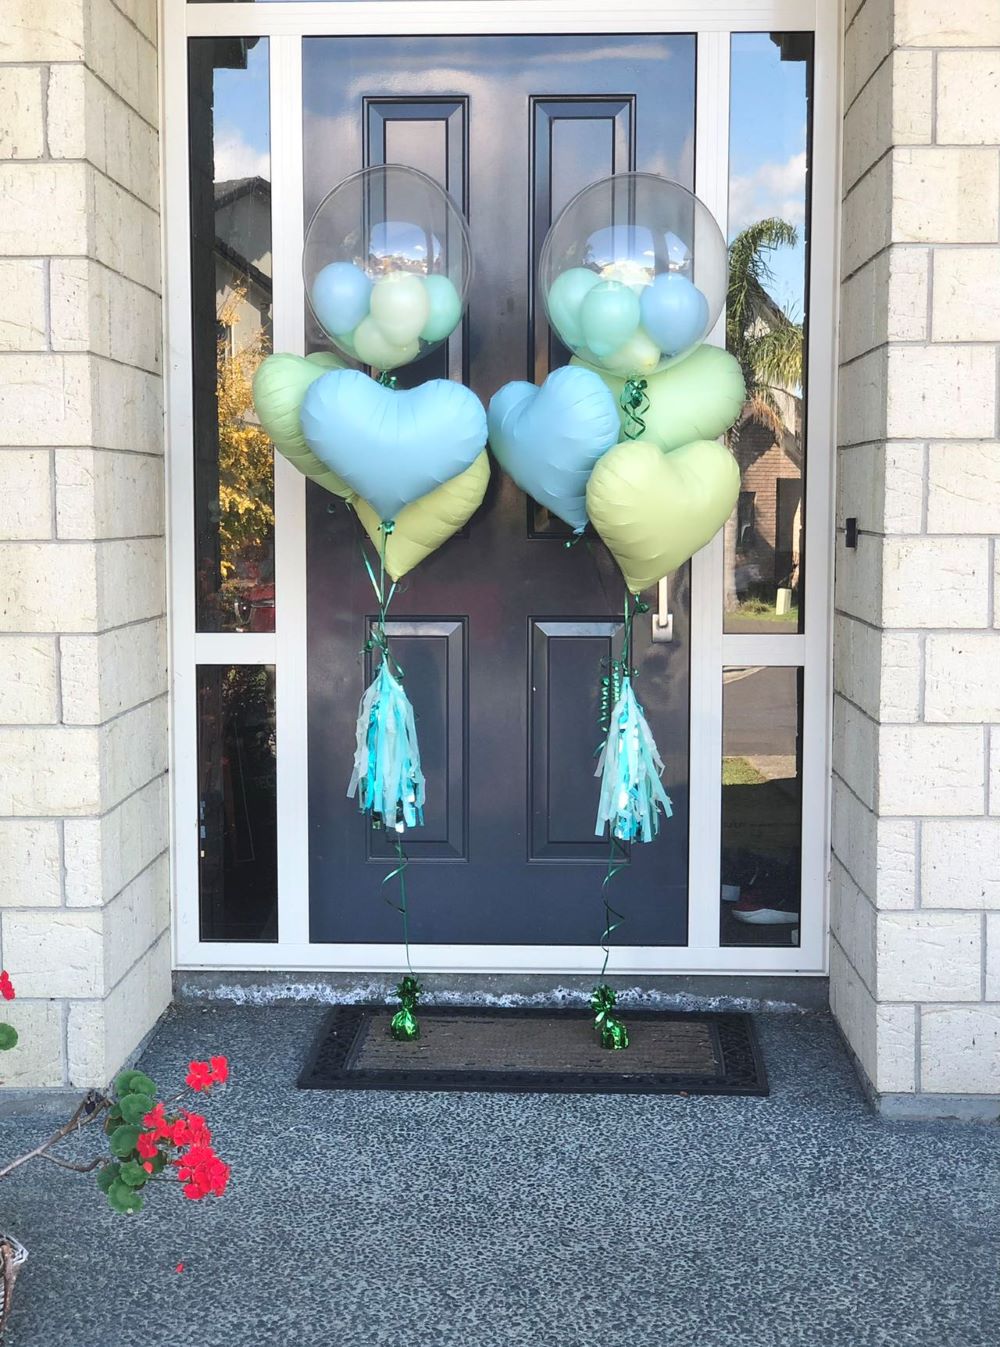 My Party Box Bubble Gum Balloon Bouquet with one bubble balloon with mini latex balloon inside and one pastel blue foil heart balloon, one Pastel green foil heart balloon and one pastel yellow  Heart Balloon in front of door